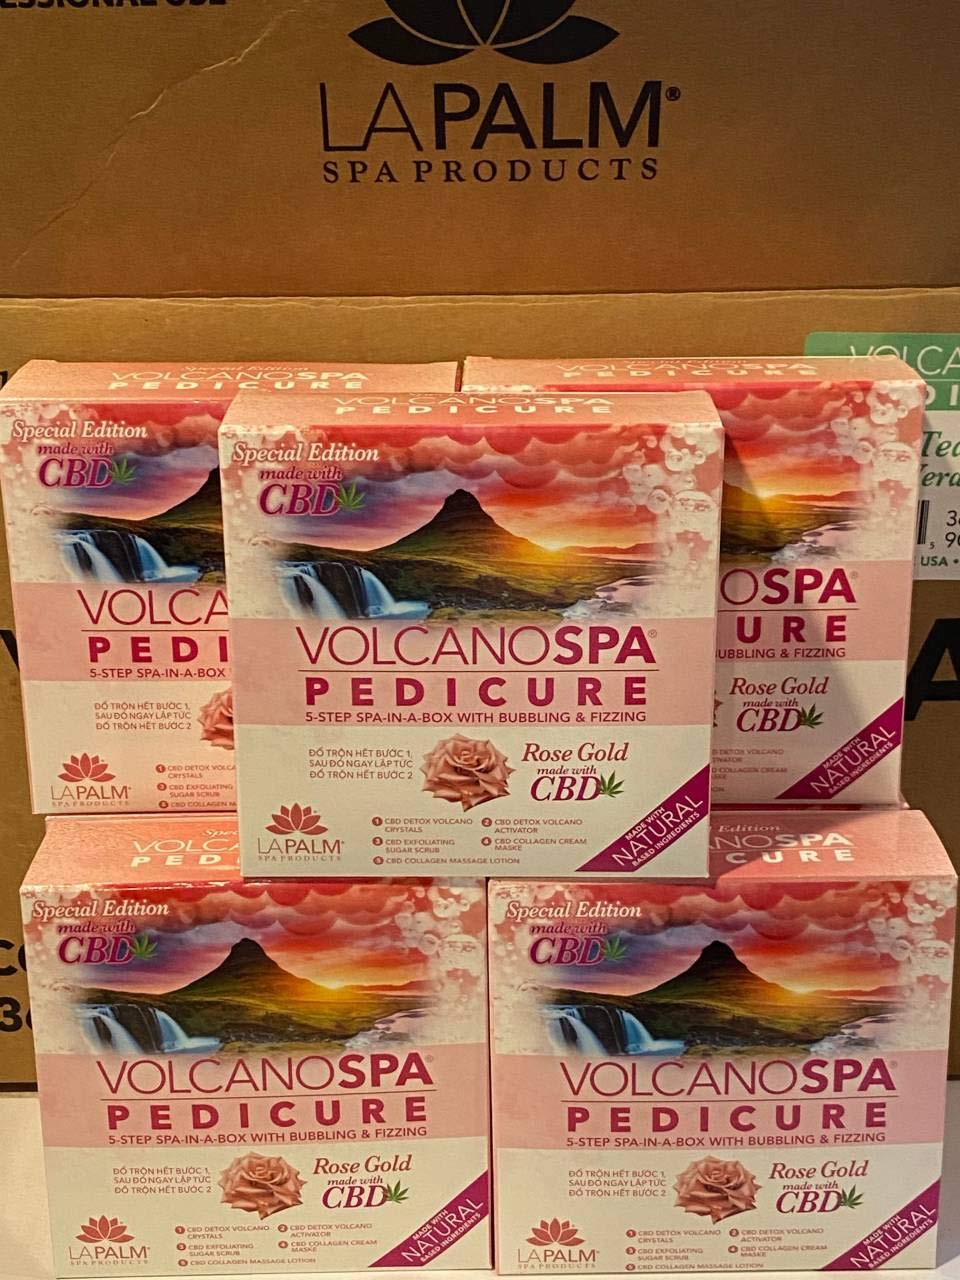 Volcano Spa Pedicure 5-Step Spa-5 In-1 PACKAGING ROSE Gold MADE WITH CBD 7 PKS